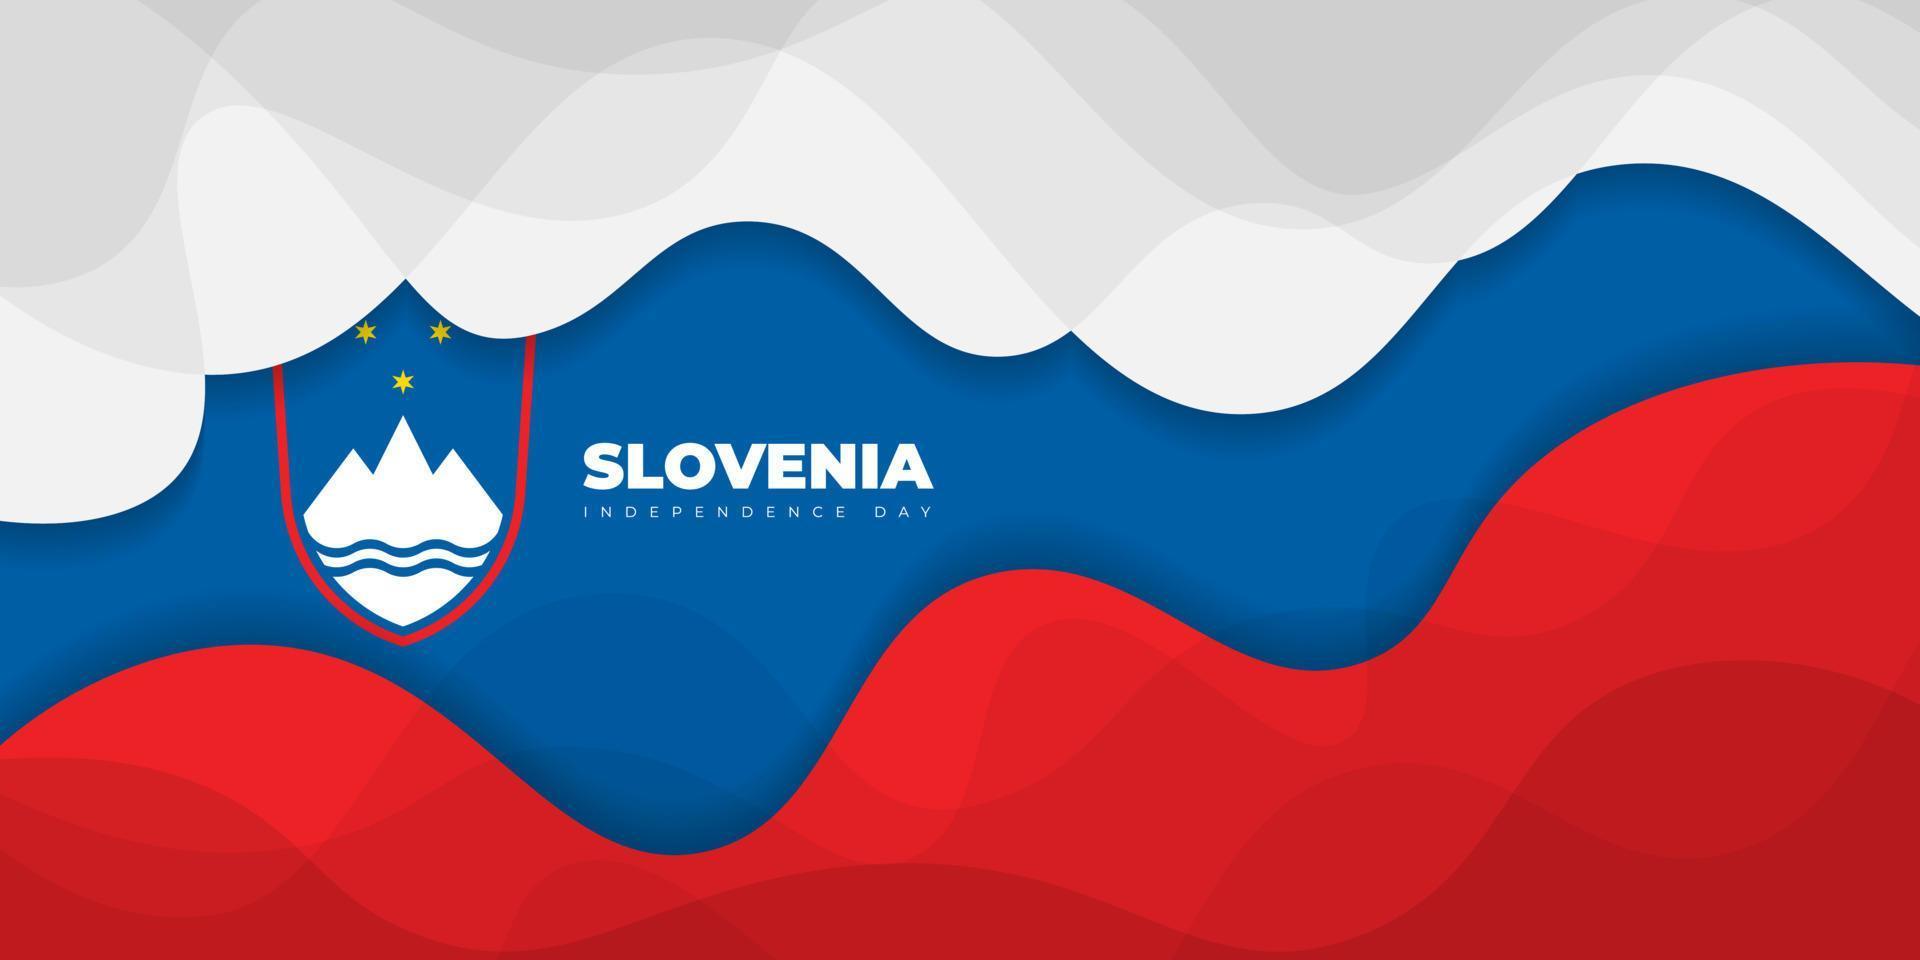 Wavy white, blue, and red background design. Slovenia Independence day template design. vector